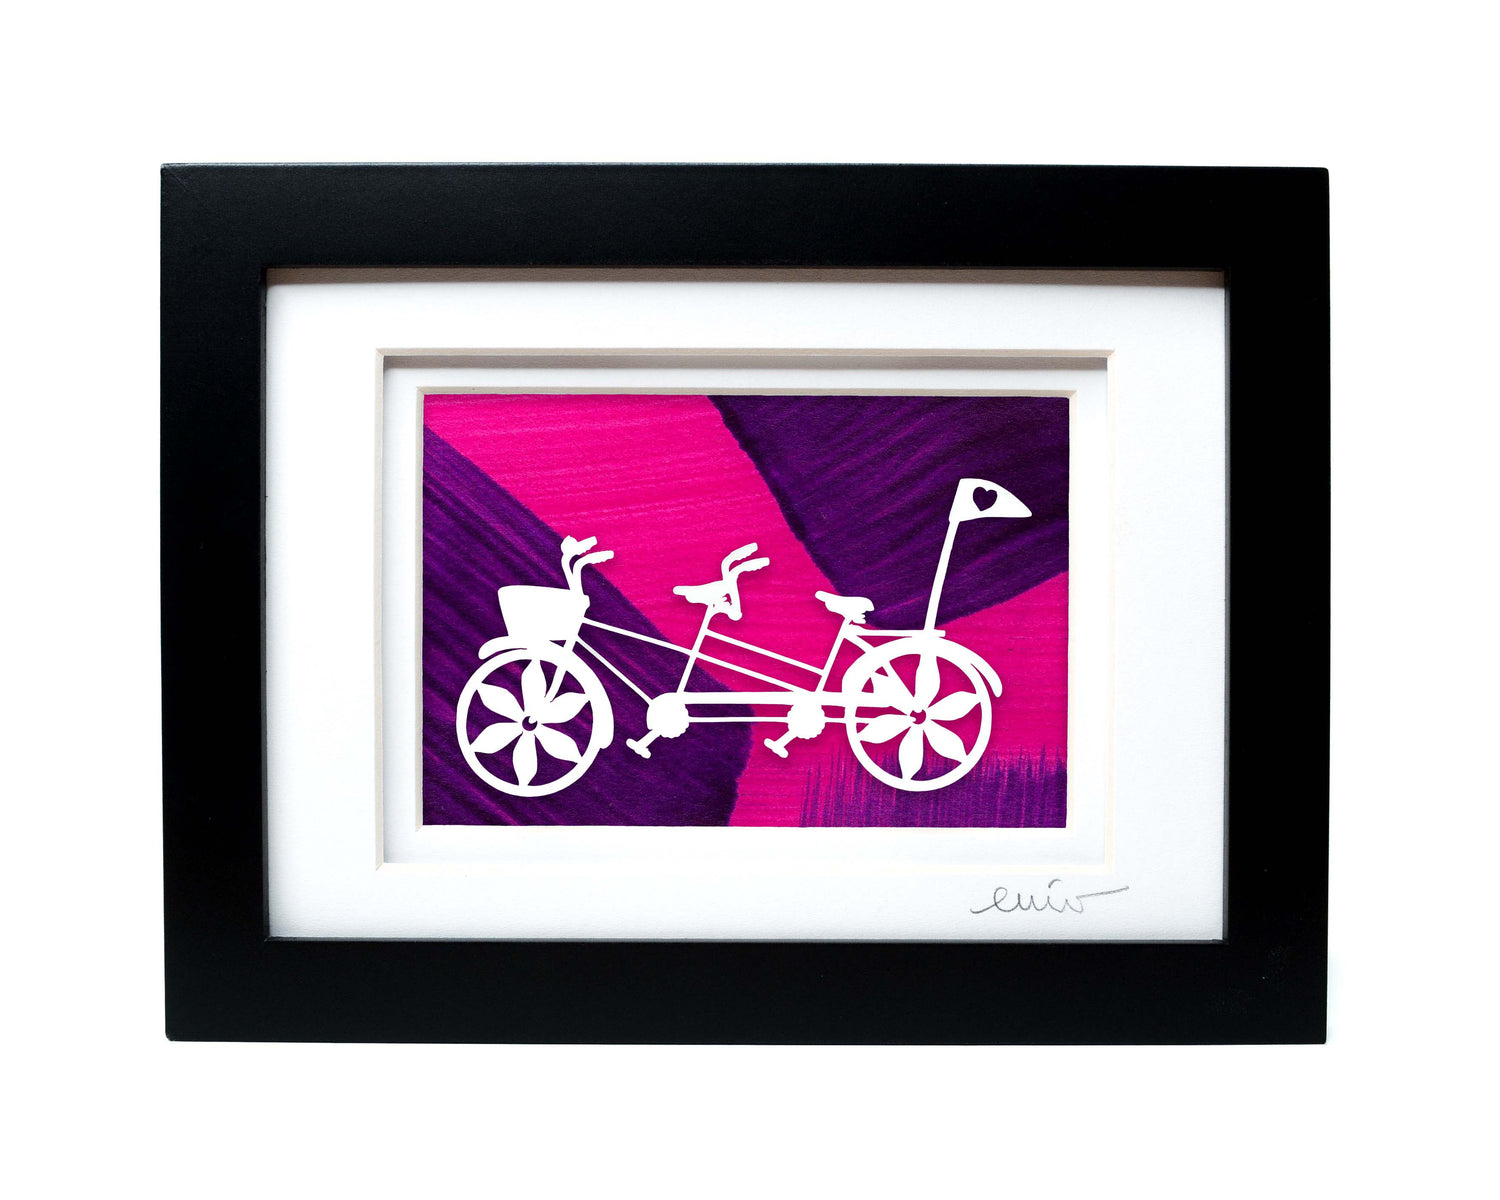 White tandem couples bike with heart flag papercut on hand painted pink and purple background.